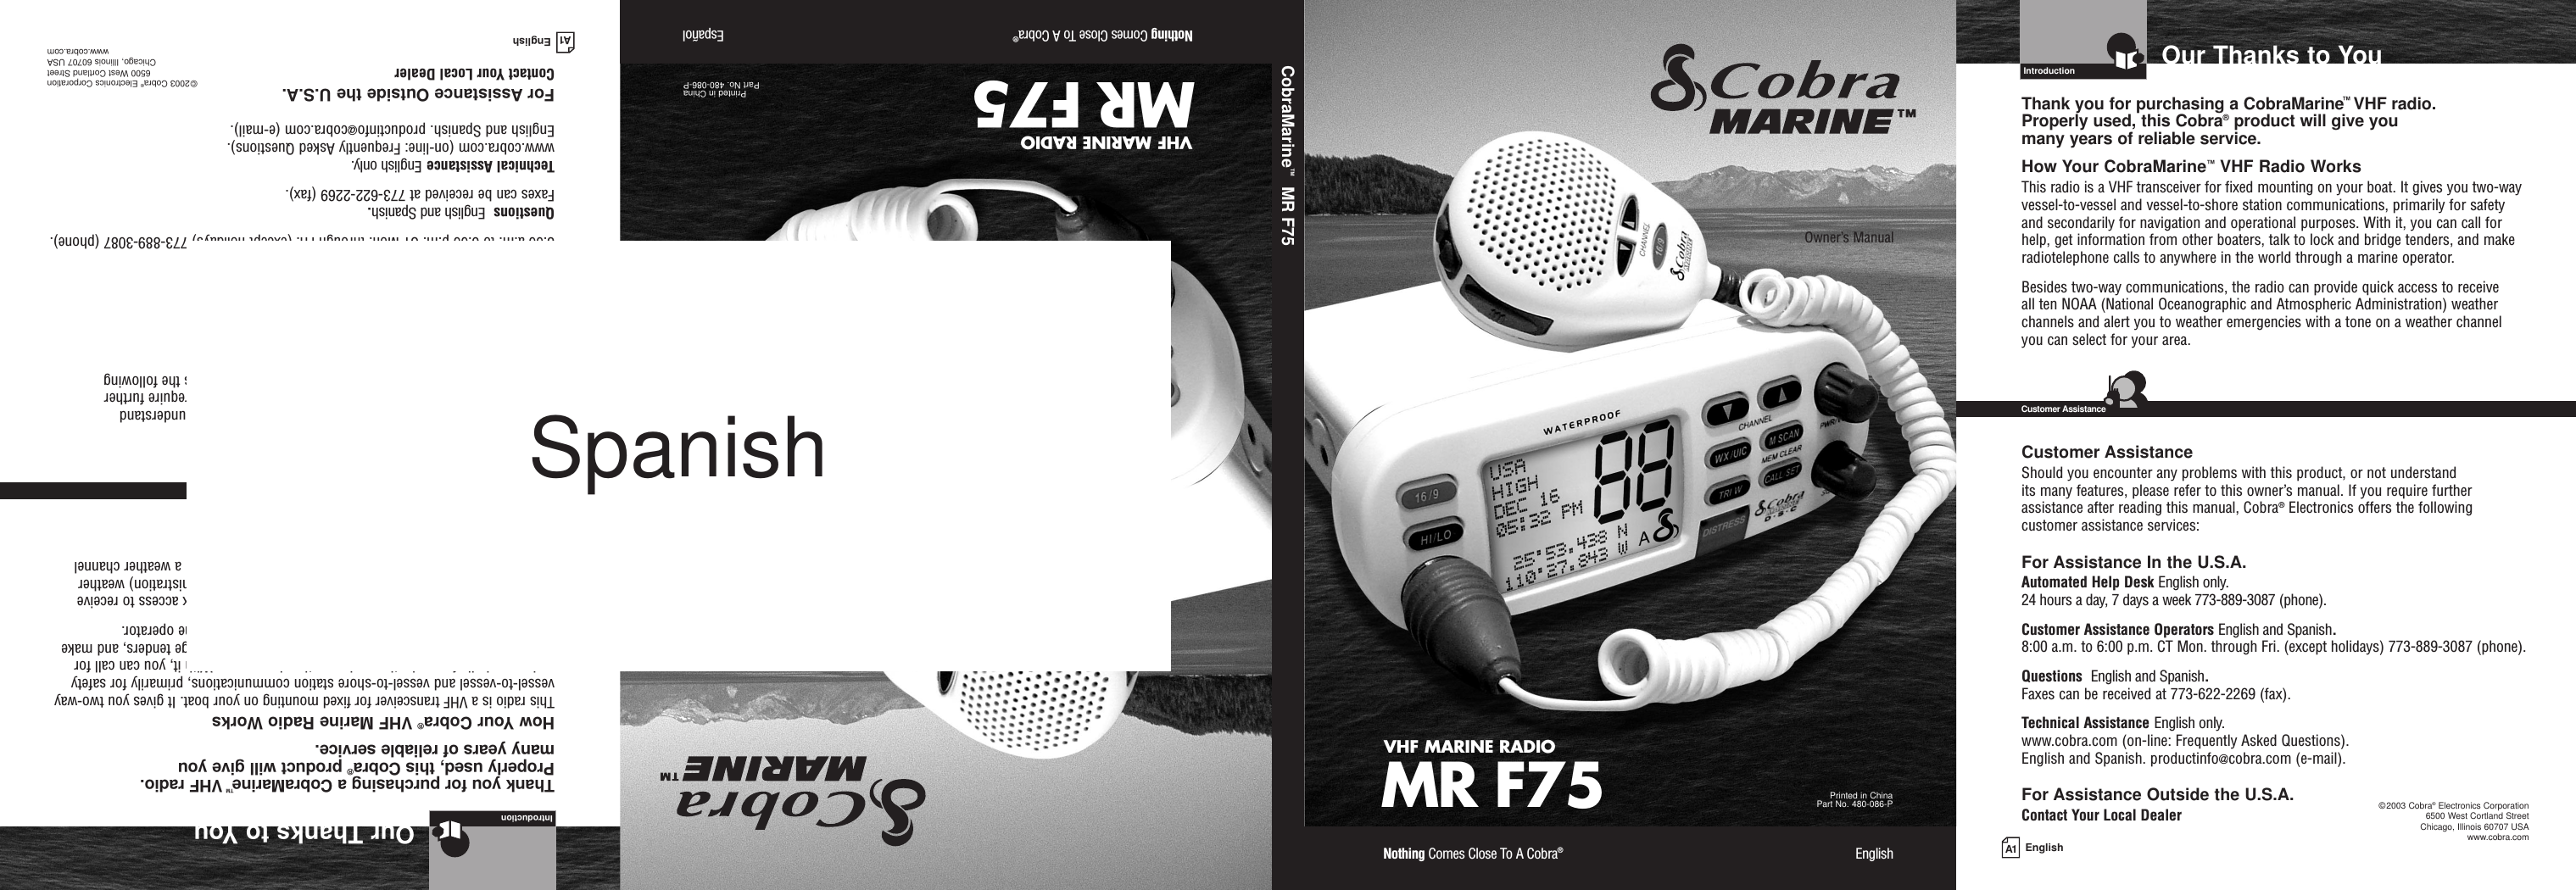 A1 EnglishOur Thanks to YouIntroductionVHF MARINE RADIOMR F75Printed in China Part No. 480-086-POwner’s ManualNothing Comes Close To A Cobra®EnglishThank you for purchasing a CobraMarine™VHF radio. Properly used, this Cobra®product will give you many years of reliable service.How Your CobraMarine™VHF Radio WorksThis radio is a VHF transceiver for fixed mounting on your boat. It gives you two-wayvessel-to-vessel and vessel-to-shore station communications, primarily for safetyand secondarily for navigation and operational purposes. With it, you can call forhelp, get information from other boaters, talk to lock and bridge tenders, and makeradiotelephone calls to anywhere in the world through a marine operator.Besides two-way communications, the radio can provide quick access to receive all ten NOAA (National Oceanographic and Atmospheric Administration) weatherchannels and alert you to weather emergencies with a tone on a weather channelyou can select for your area.Customer AssistanceShould you encounter any problems with this product, or not understand its many features, please refer to this owner’s manual. If you require furtherassistance after reading this manual, Cobra®Electronics offers the followingcustomer assistance services:For Assistance In the U.S.A. Automated Help Desk English only.24 hours a day, 7 days a week 773-889-3087 (phone).Customer Assistance Operators English and Spanish.8:00 a.m. to 6:00 p.m. CT Mon. through Fri. (except holidays) 773-889-3087 (phone).Questions  English and Spanish.Faxes can be received at 773-622-2269 (fax).Technical Assistance English only.www.cobra.com (on-line: Frequently Asked Questions).English and Spanish. productinfo@cobra.com (e-mail).For Assistance Outside the U.S.A.Contact Your Local DealerCustomer Assistance©2003 Cobra®Electronics Corporation6500 West Cortland StreetChicago, Illinois 60707 USAwww.cobra.comA1 EnglishOur Thanks to YouIntroductionVHF MARINE RADIOMR F75Printed in China Part No. 480-086-POwner’s ManualNothing Comes Close To A Cobra®EspañolThank you for purchasing a CobraMarine™VHF radio. Properly used, this Cobra®product will give you many years of reliable service.How Your Cobra®VHF Marine Radio WorksThis radio is a VHF transceiver for fixed mounting on your boat. It gives you two-wayvessel-to-vessel and vessel-to-shore station communications, primarily for safetyand secondarily for navigation and operational purposes. With it, you can call forhelp, get information from other boaters, talk to lock and bridge tenders, and makeradiotelephone calls to anywhere in the world through a marine operator.Besides two-way communications, the radio can provide quick access to receive all ten NOAA (National Oceanographic and Atmospheric Administration) weatherchannels and alert you to weather emergencies with a tone on a weather channelyou can select for your area.Customer AssistanceShould you encounter any problems with this product, or not understand its many features, please refer to this owner’s manual. If you require furtherassistance after reading this manual, Cobra®Electronics offers the followingcustomer assistance services:For Assistance In the U.S.A. Automated Help Desk English only.24 hours a day, 7 days a week 773-889-3087 (phone).Customer Assistance Operators English and Spanish.8:00 a.m. to 6:00 p.m. CT Mon. through Fri. (except holidays) 773-889-3087 (phone).Questions  English and Spanish.Faxes can be received at 773-622-2269 (fax).Technical Assistance English only.www.cobra.com (on-line: Frequently Asked Questions).English and Spanish. productinfo@cobra.com (e-mail).For Assistance Outside the U.S.A.Contact Your Local DealerCustomer Assistance©2003 Cobra®Electronics Corporation6500 West Cortland StreetChicago, Illinois 60707 USAwww.cobra.comCobraMarine™MR F75Spanish